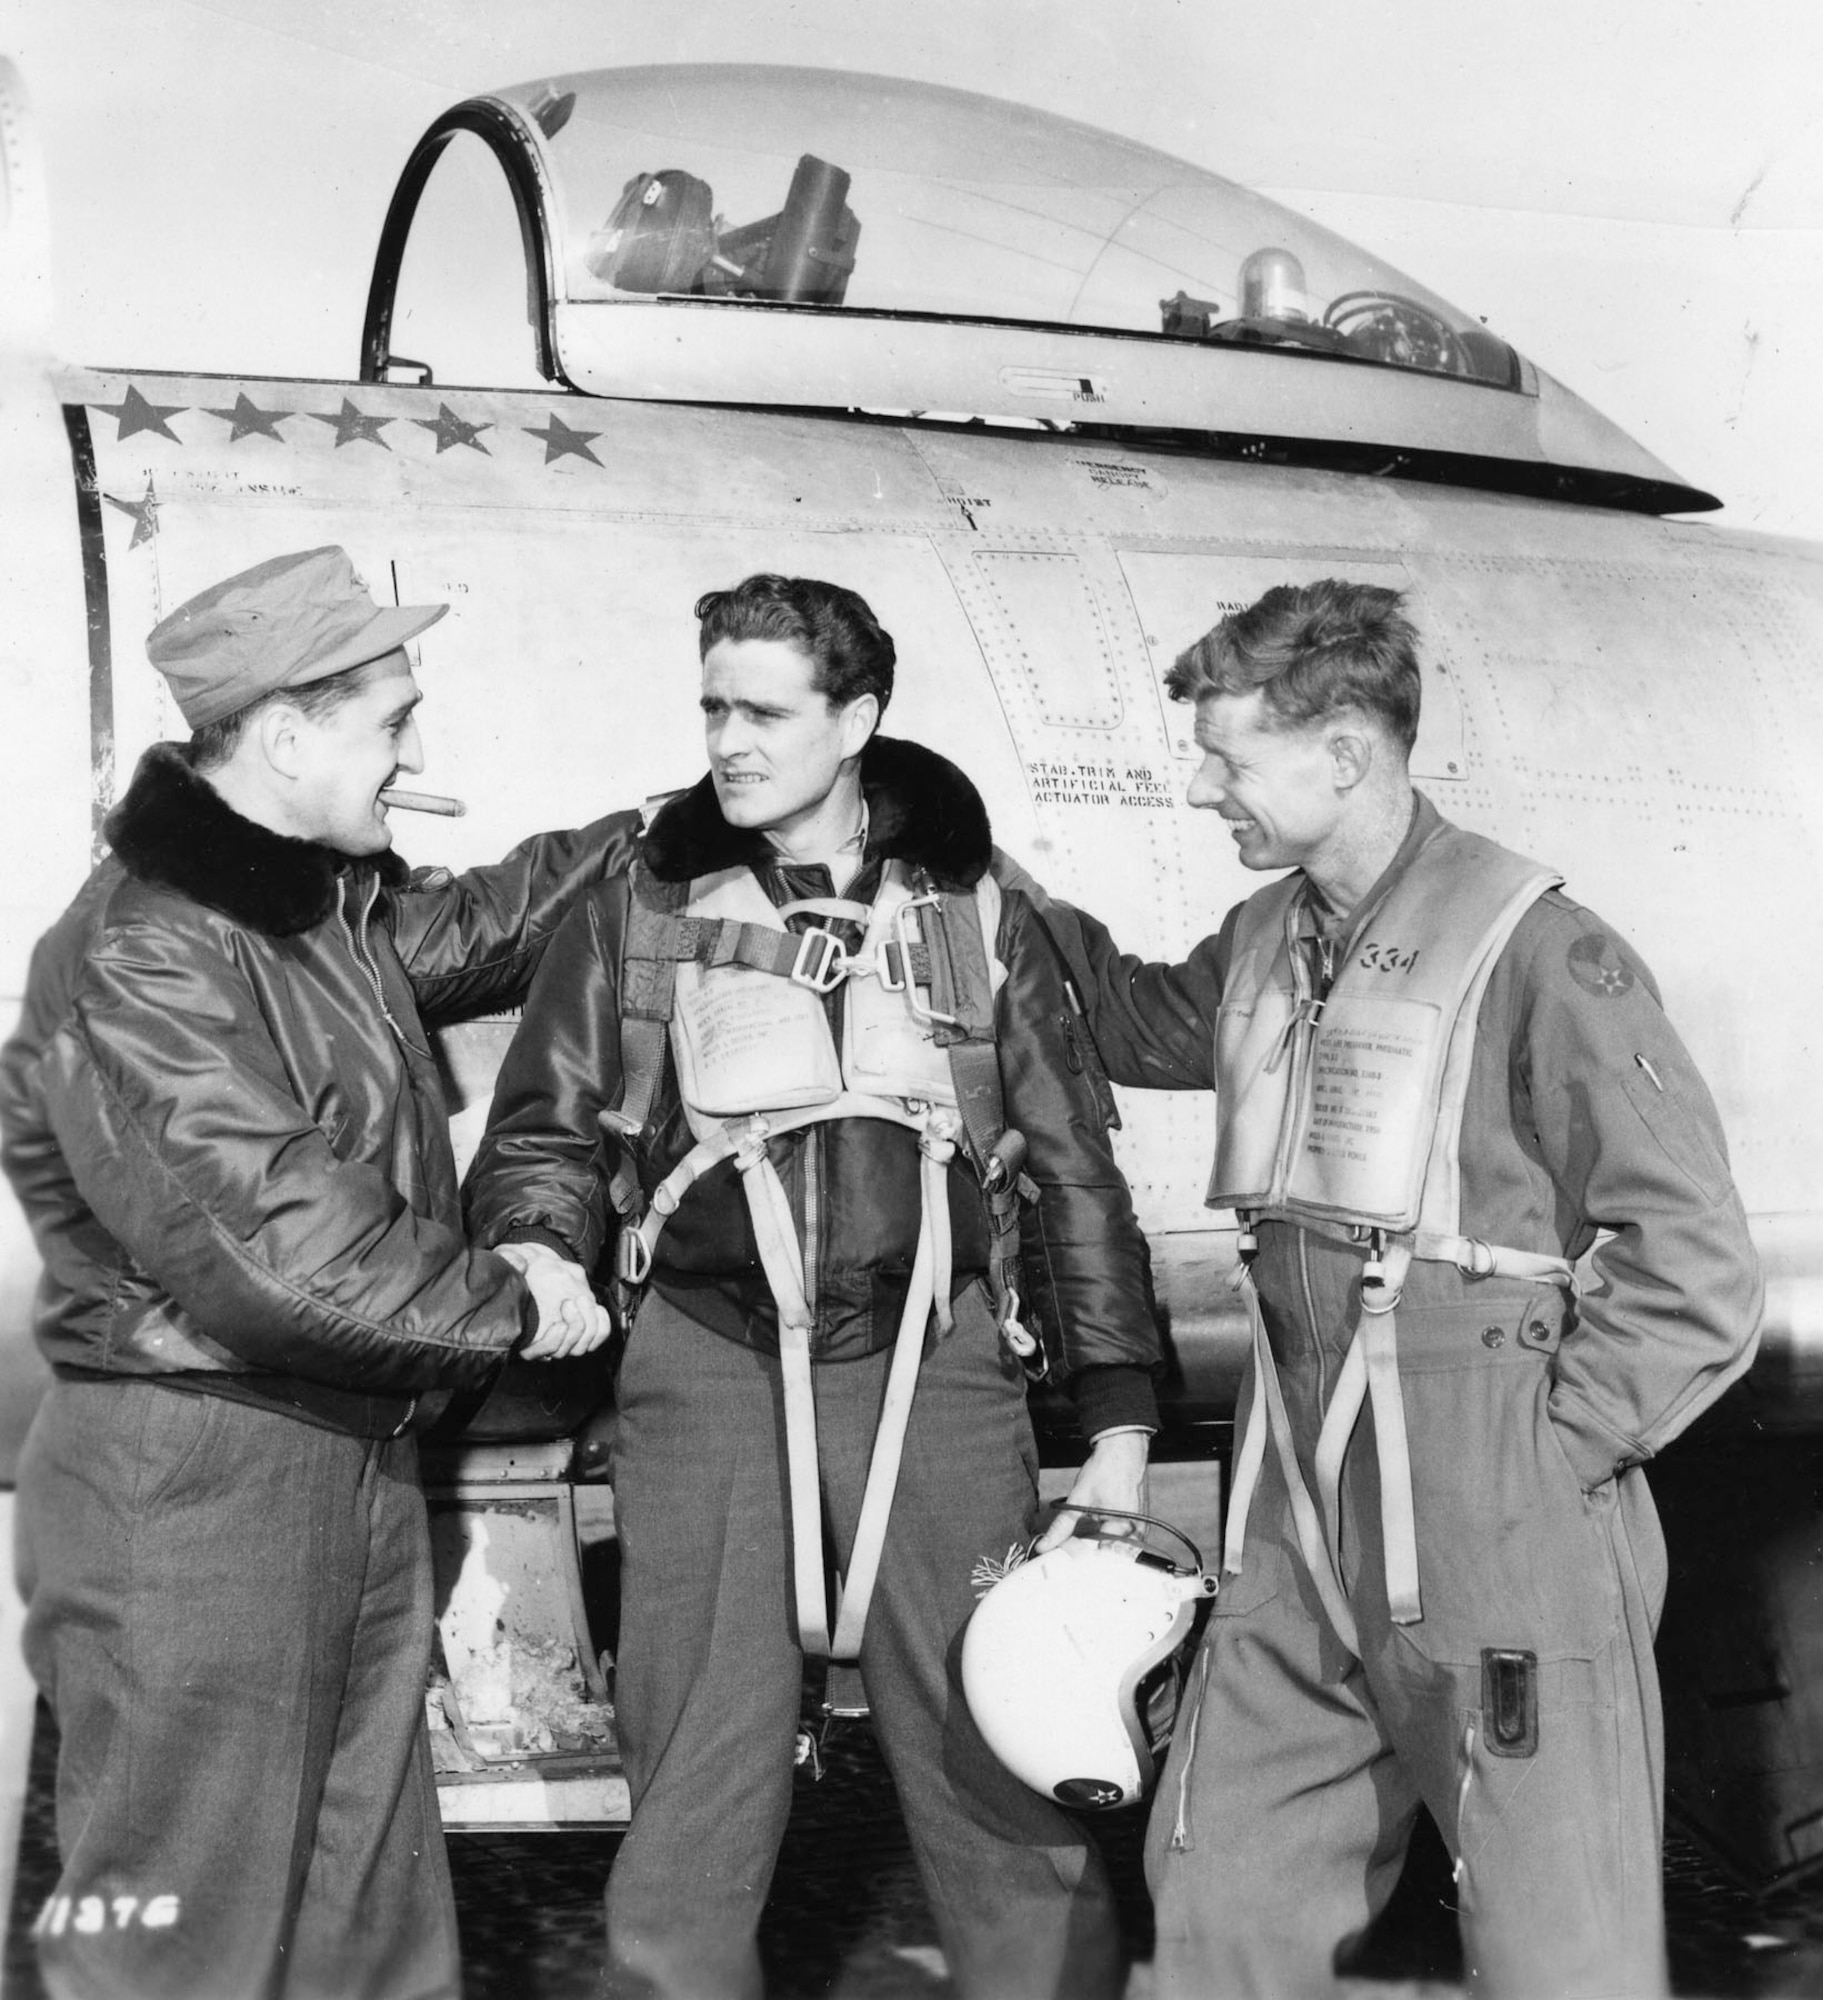 Francis S. Gabreski (left) congratulates another World War II and Korean War ace, Maj. William T. Whisner (center). On the right is Lt. Col. George Jones, a MiG ace with 6.5 kills. (U.S. Air Force photo)